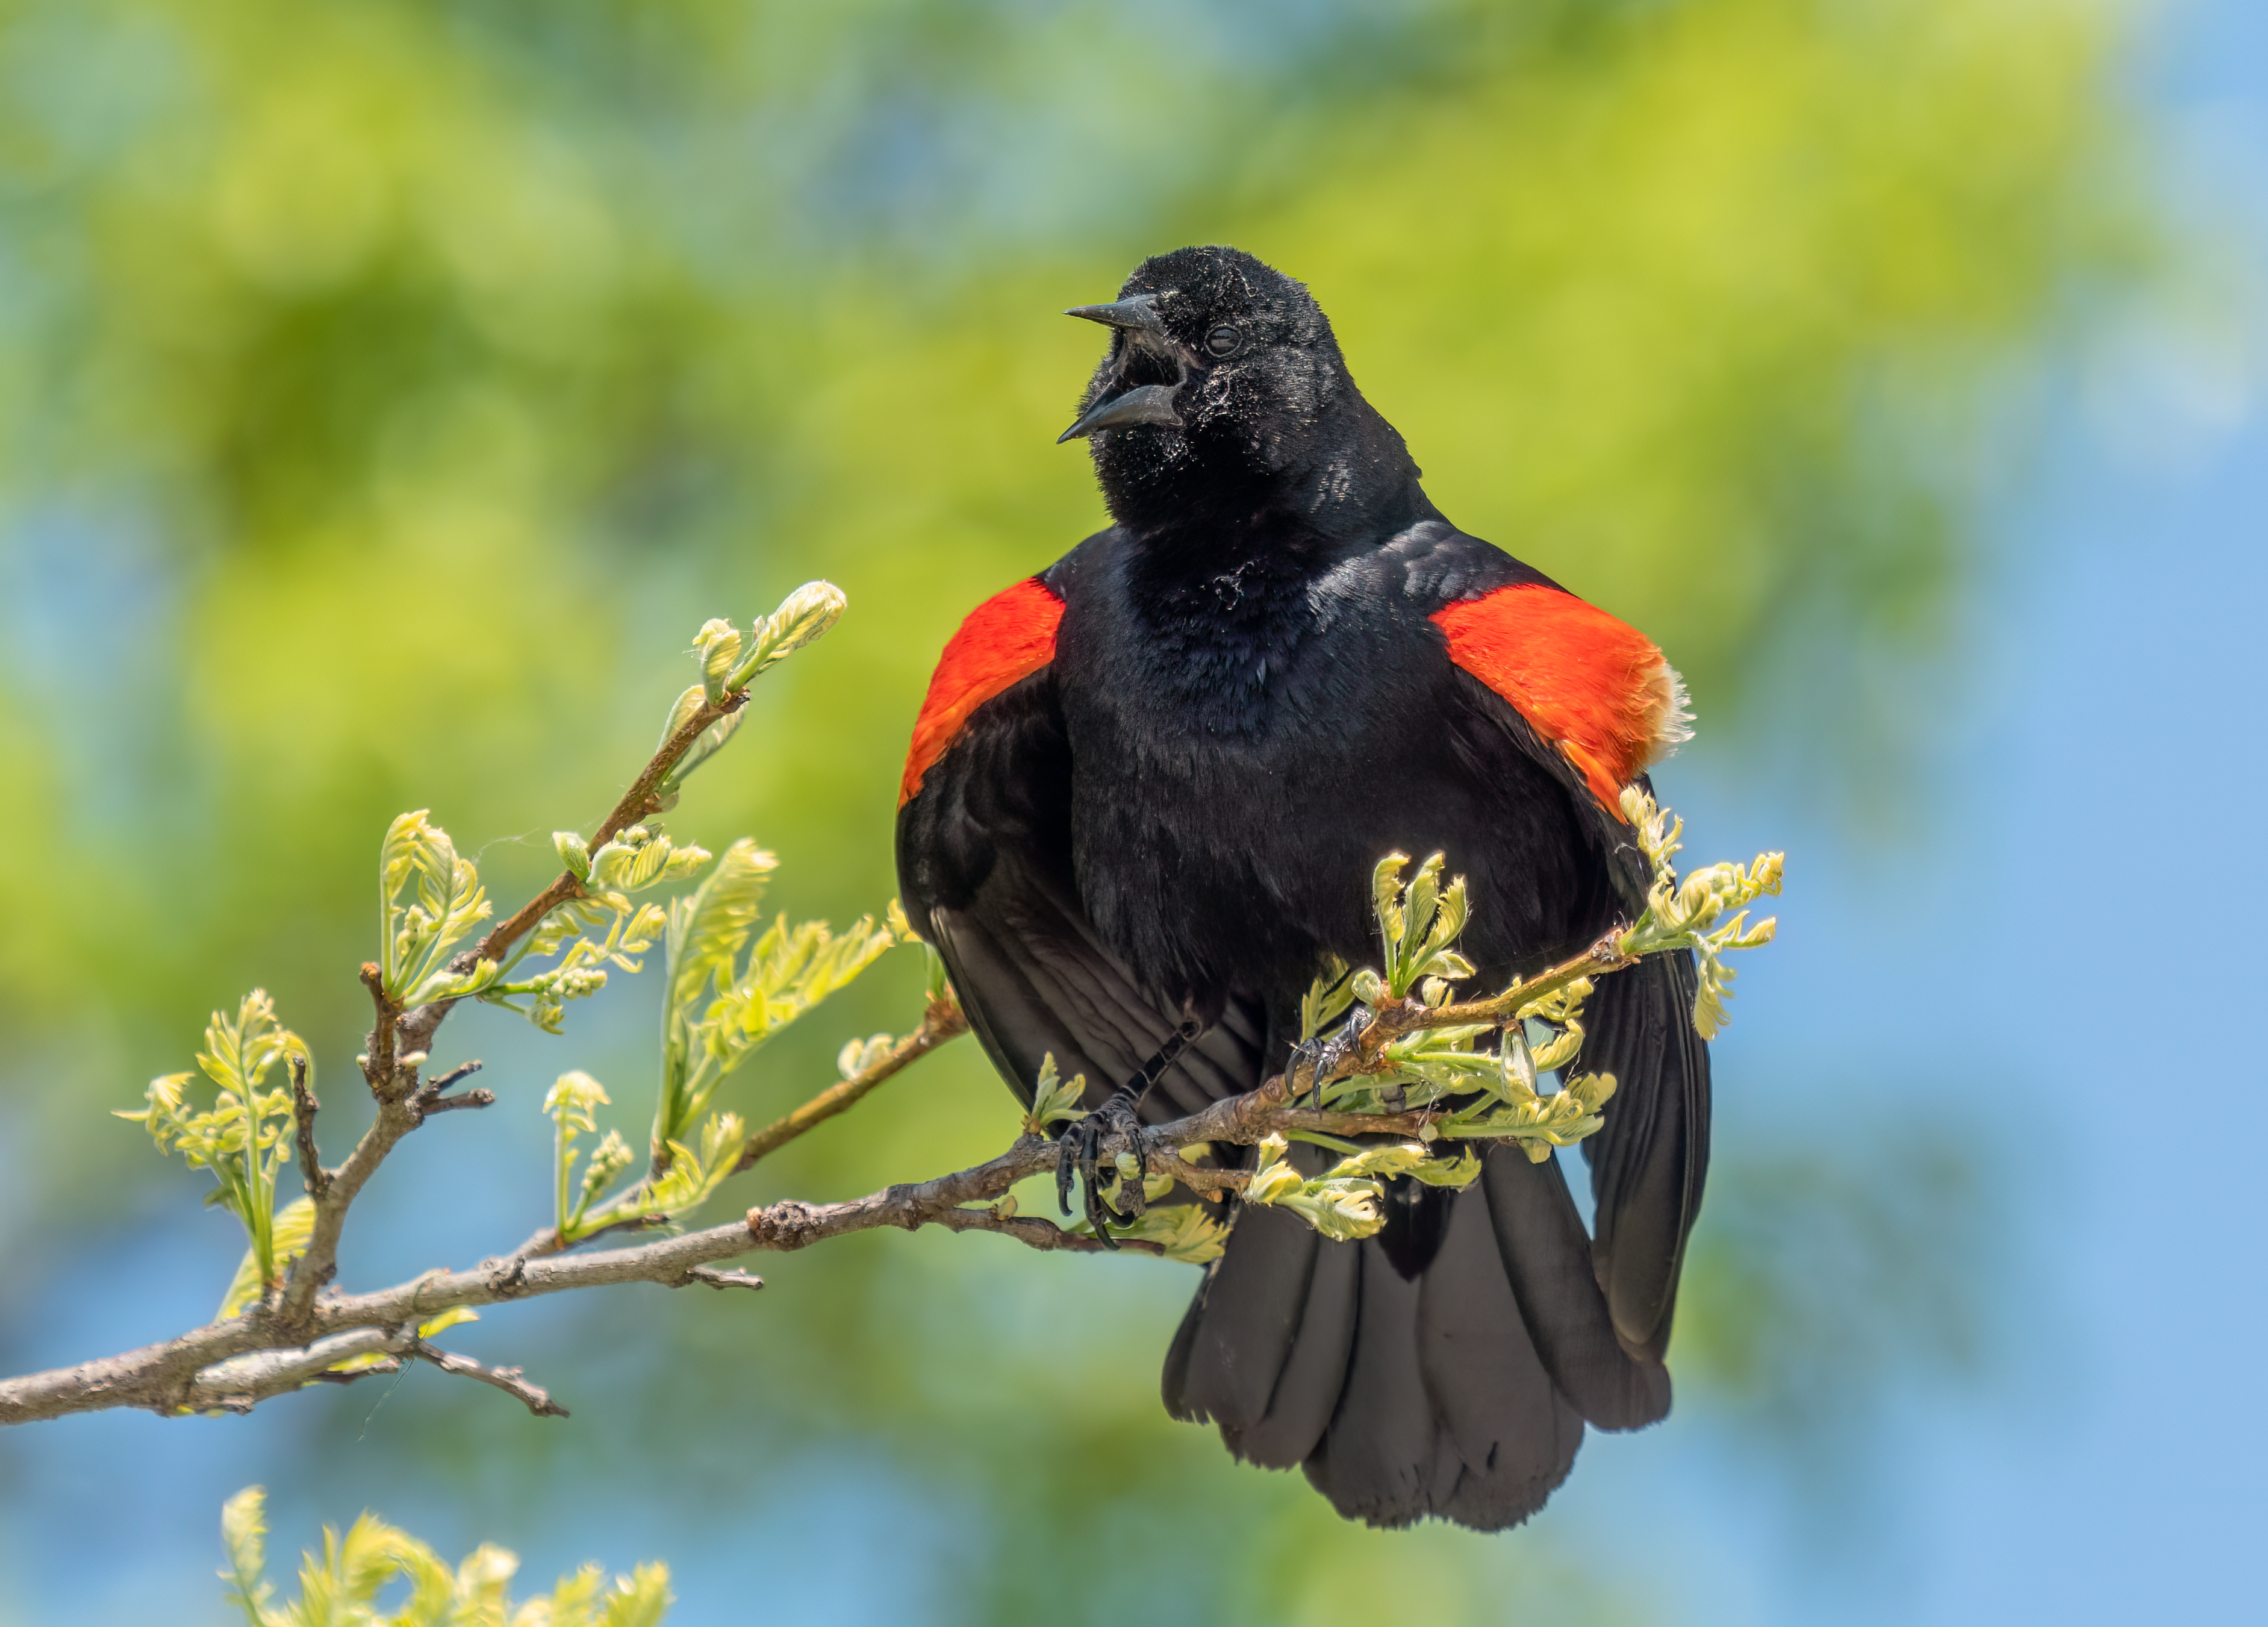 A Red-Wing Blackbird sits on a twig and yells at the neighbors. Black songbird with crimson epaulets at the shoulders.